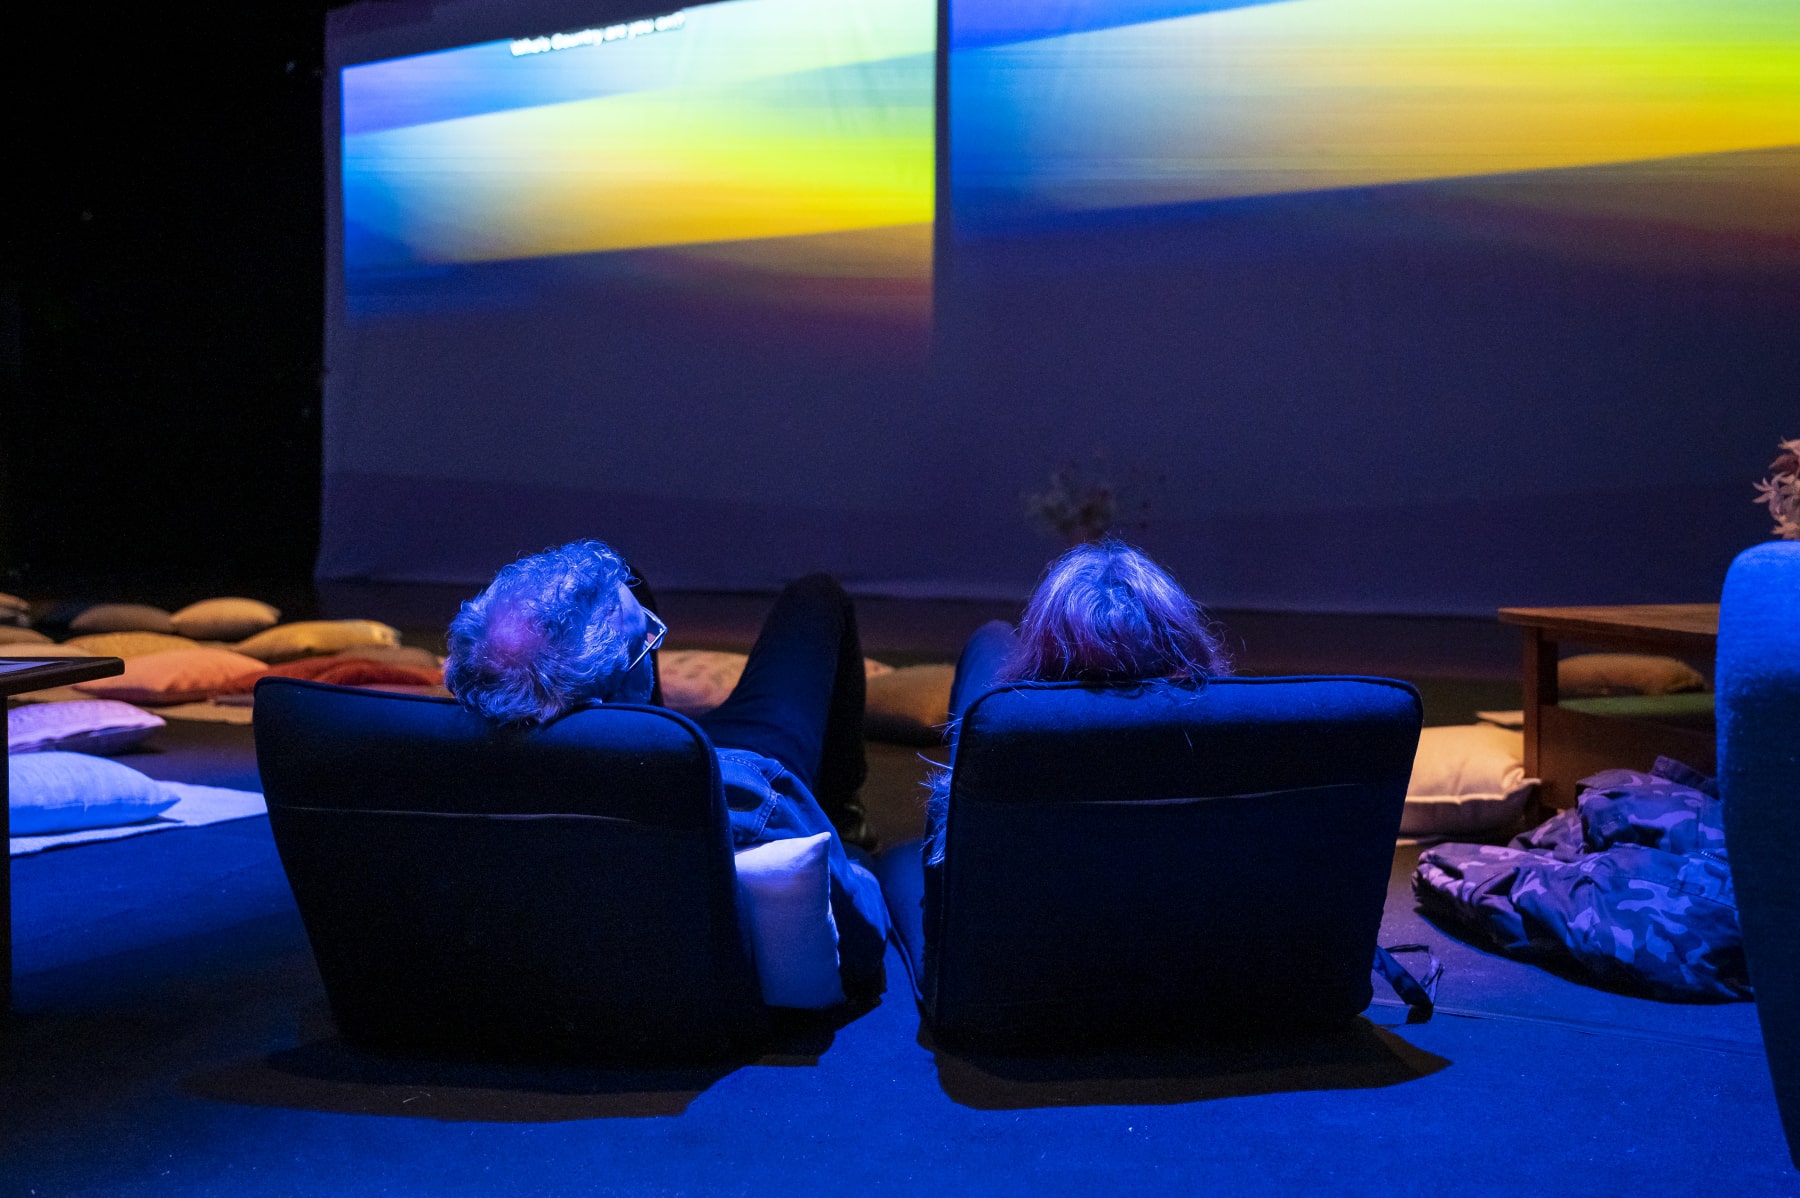 Two people are lying on black lounge chairs. Their backs are to the camera. They are watching two large screens with an gradient of colours on them.